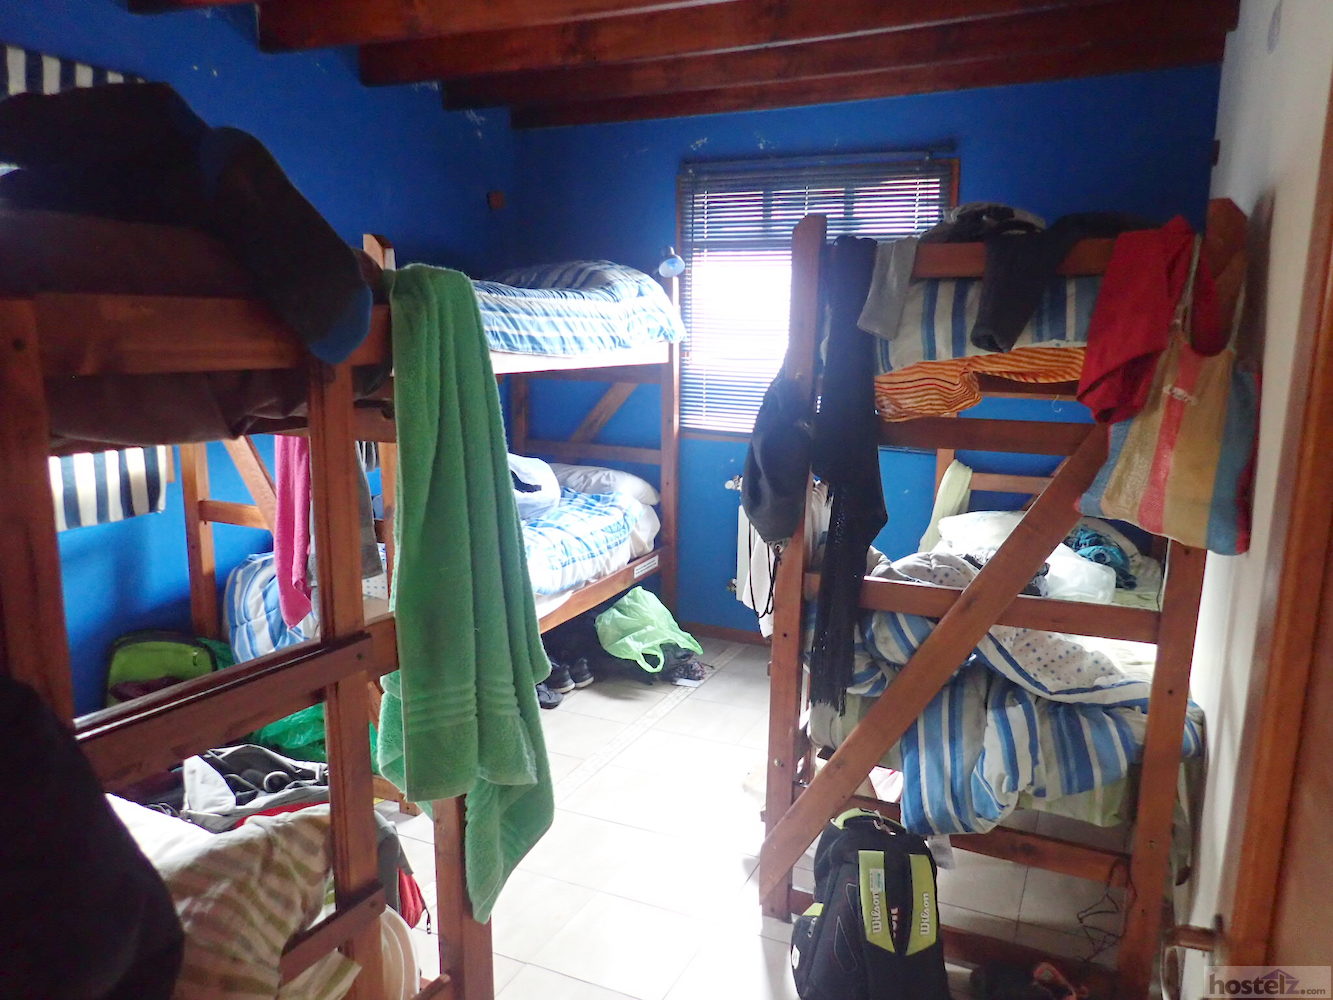 One of the 6-bed dorms (upstairs)